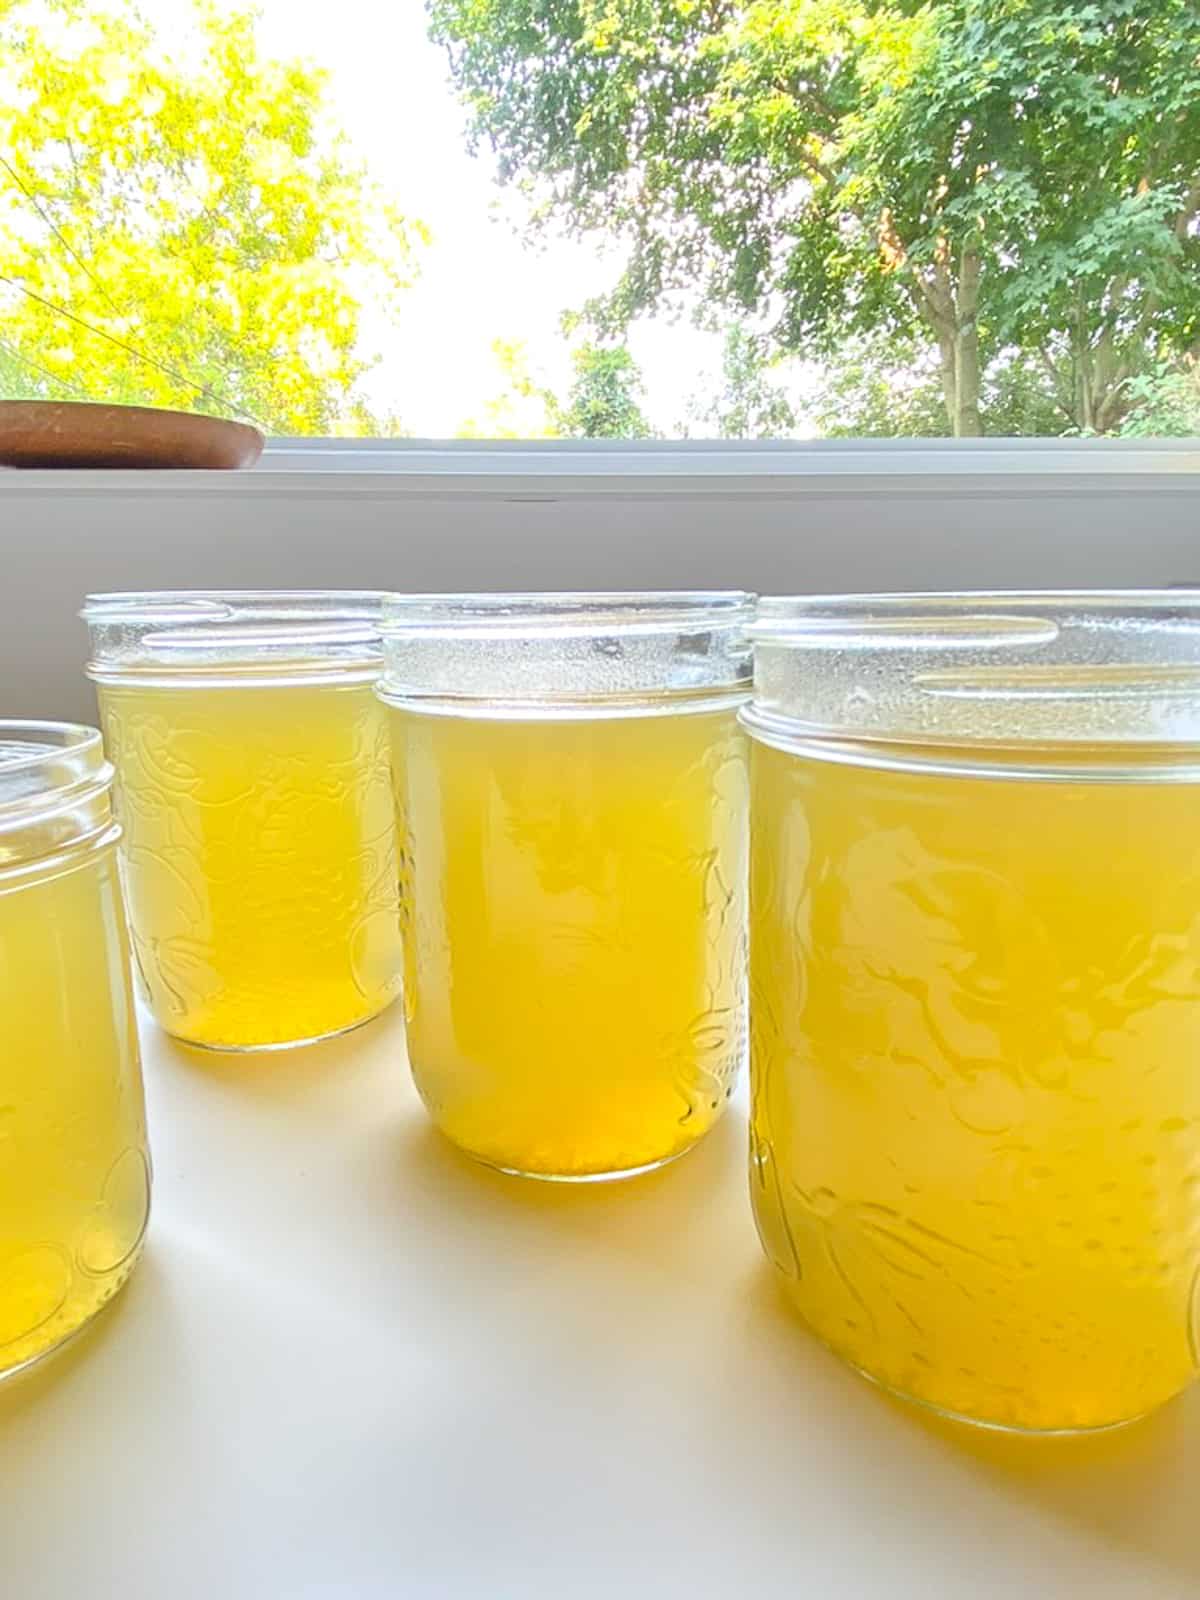 An image of corn broth cooling in jars on a white counter.